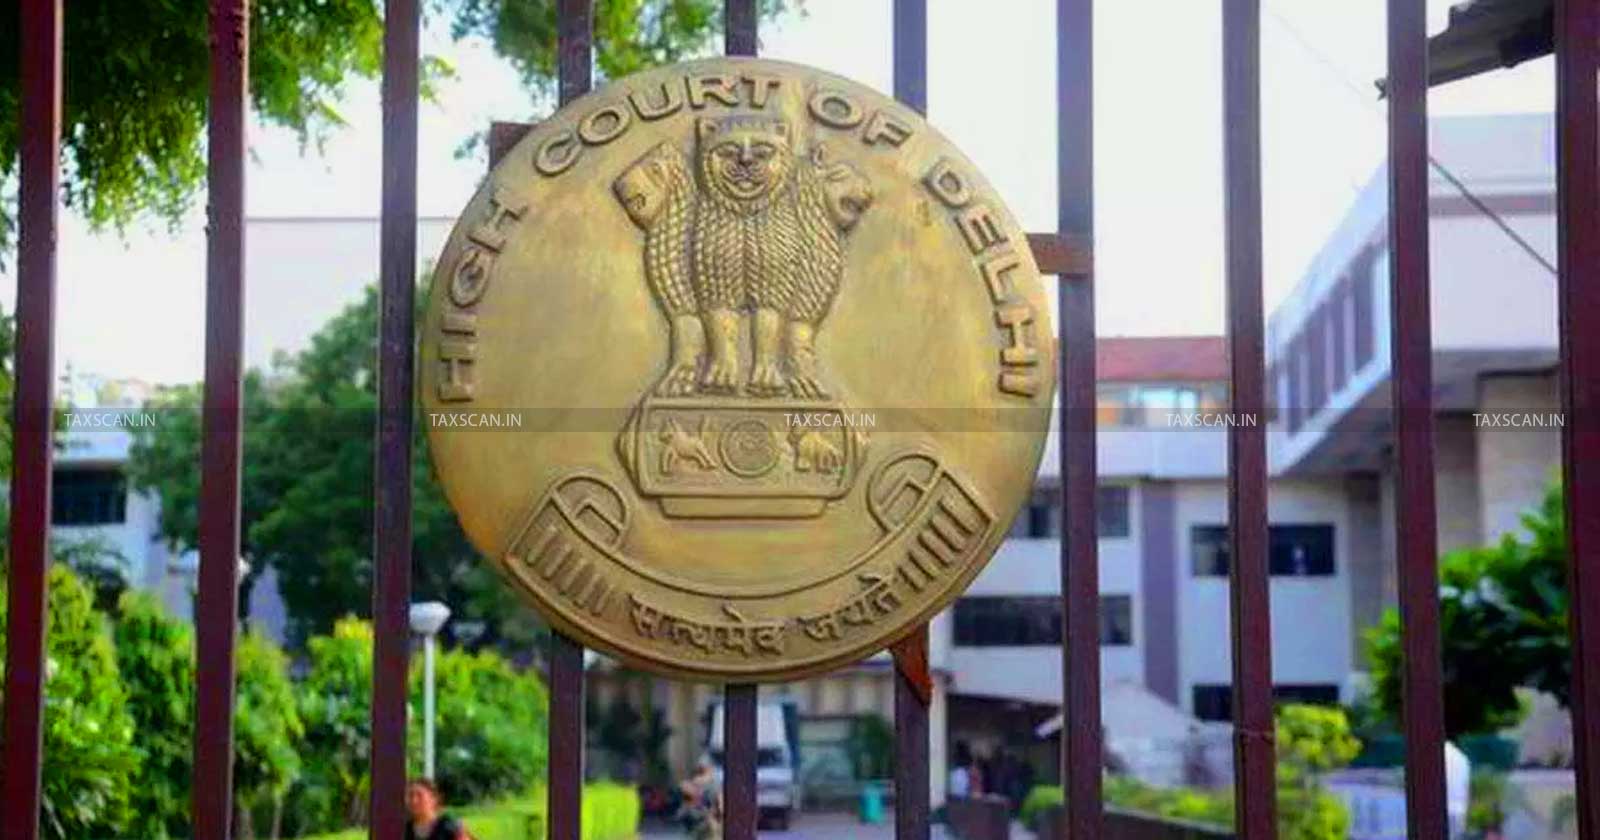 Creditworthiness - Ascertained only from Availability of Funds - Period of Existence and Revenue Earning - Delhi HC upholds Deletion of Addition - TAXSCAN